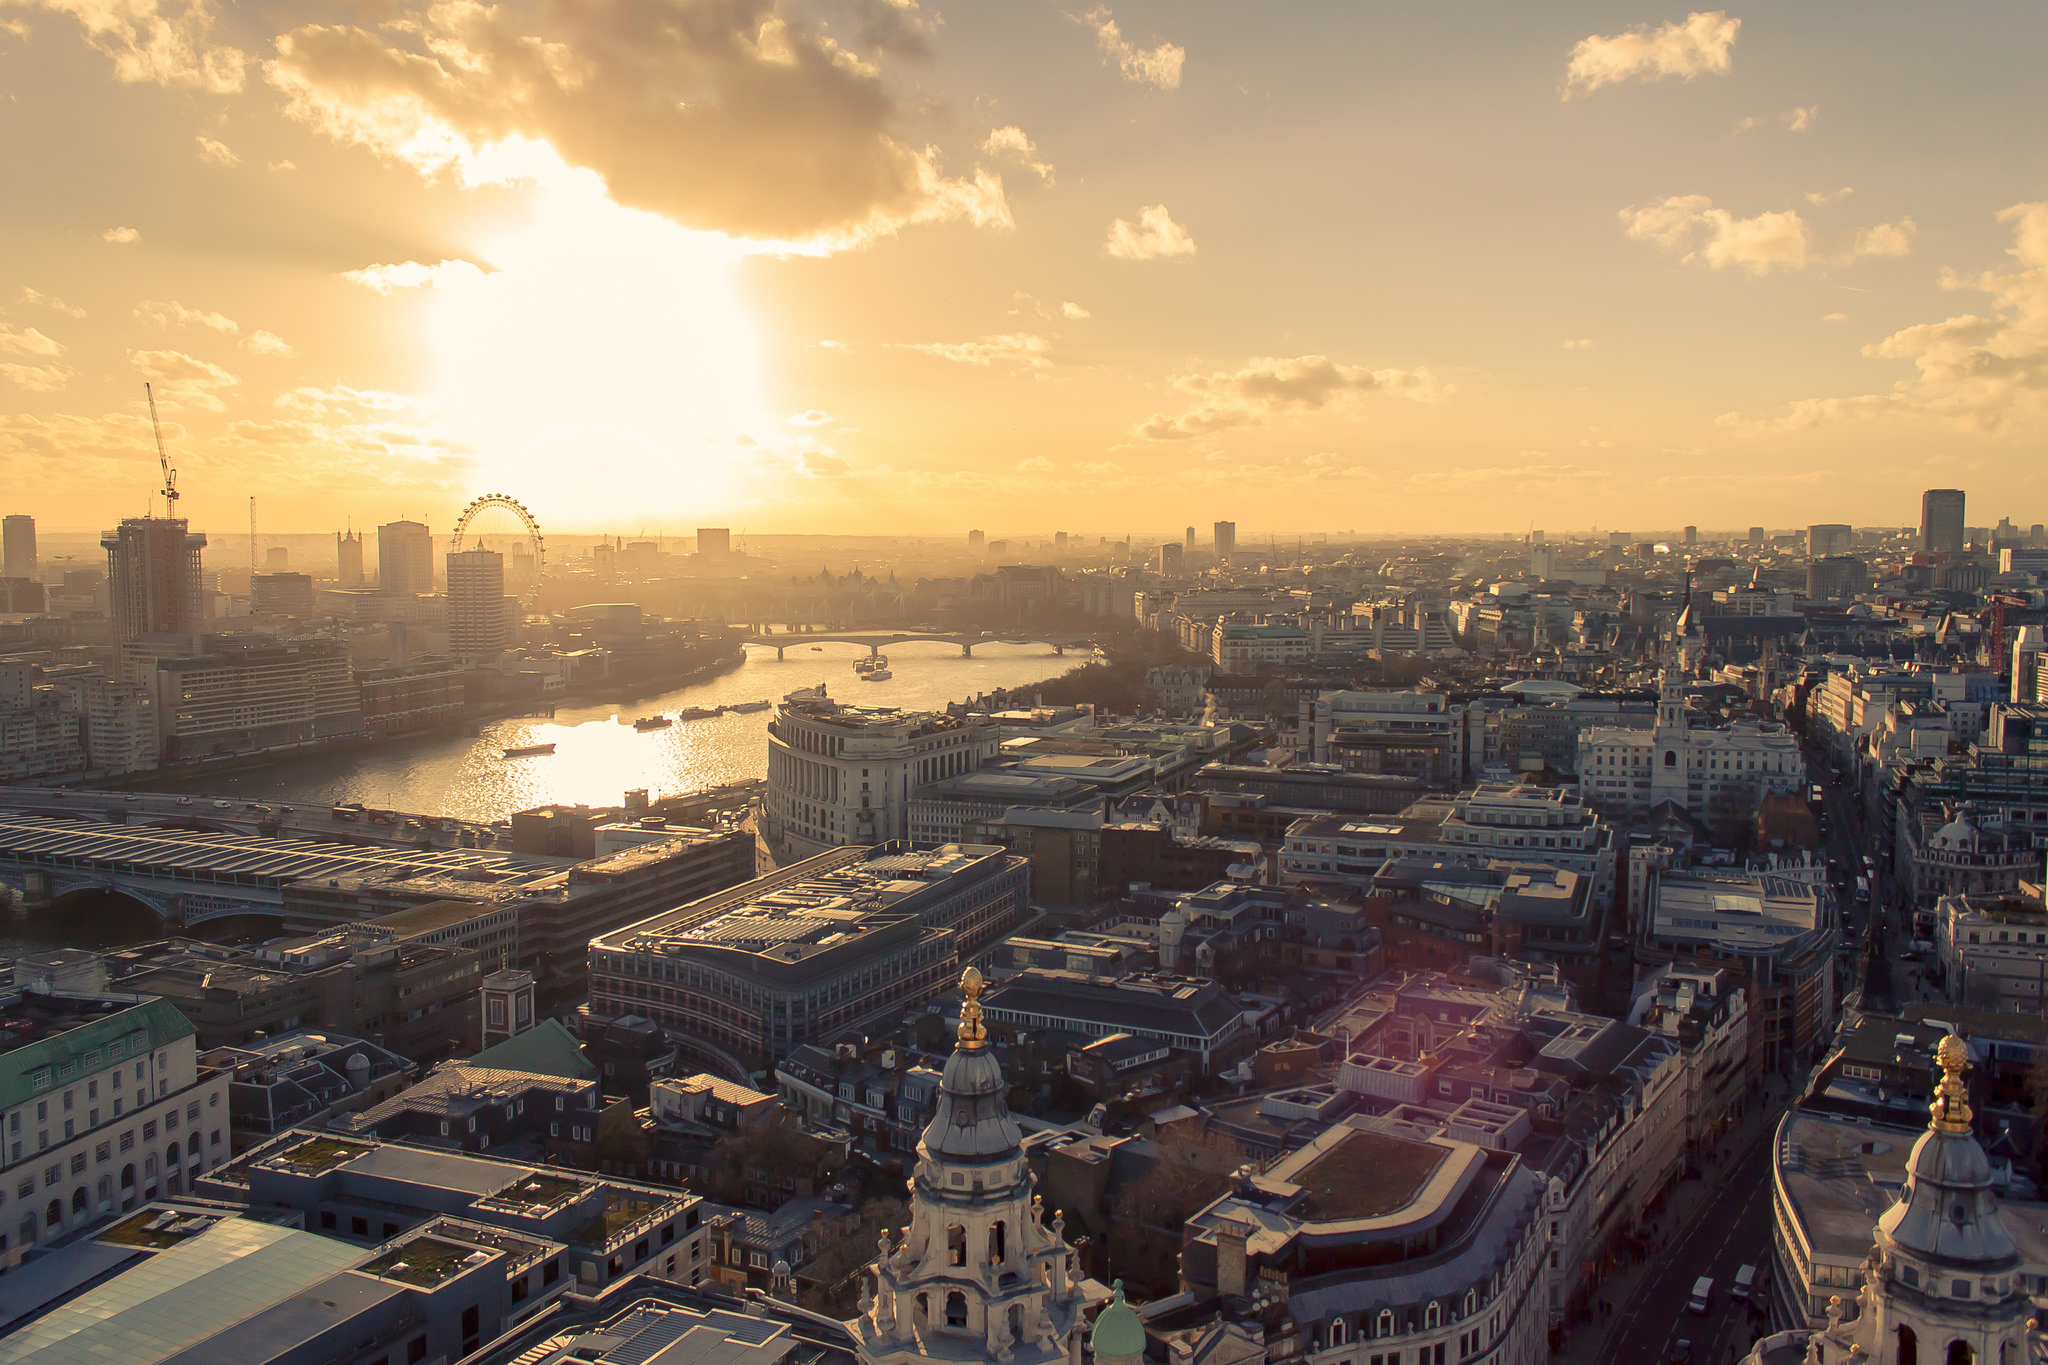 View of London from the dome of Saint Paul's Cathedral by gacabo vía Flickr